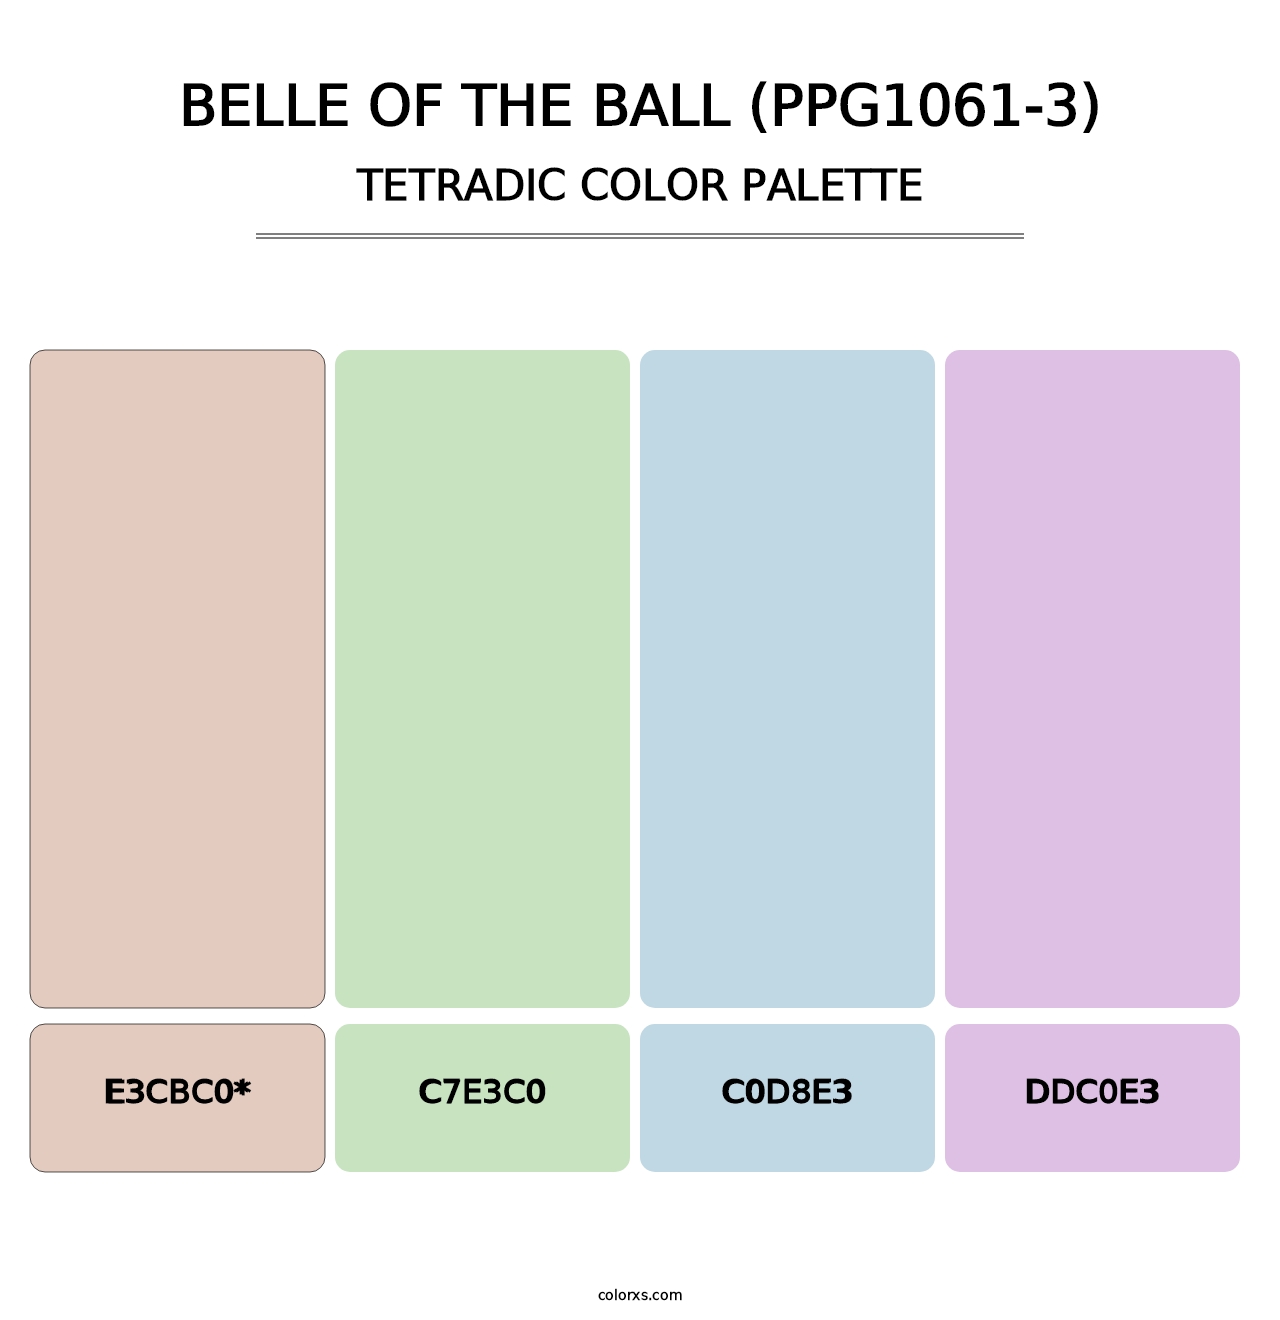 Belle Of The Ball (PPG1061-3) - Tetradic Color Palette